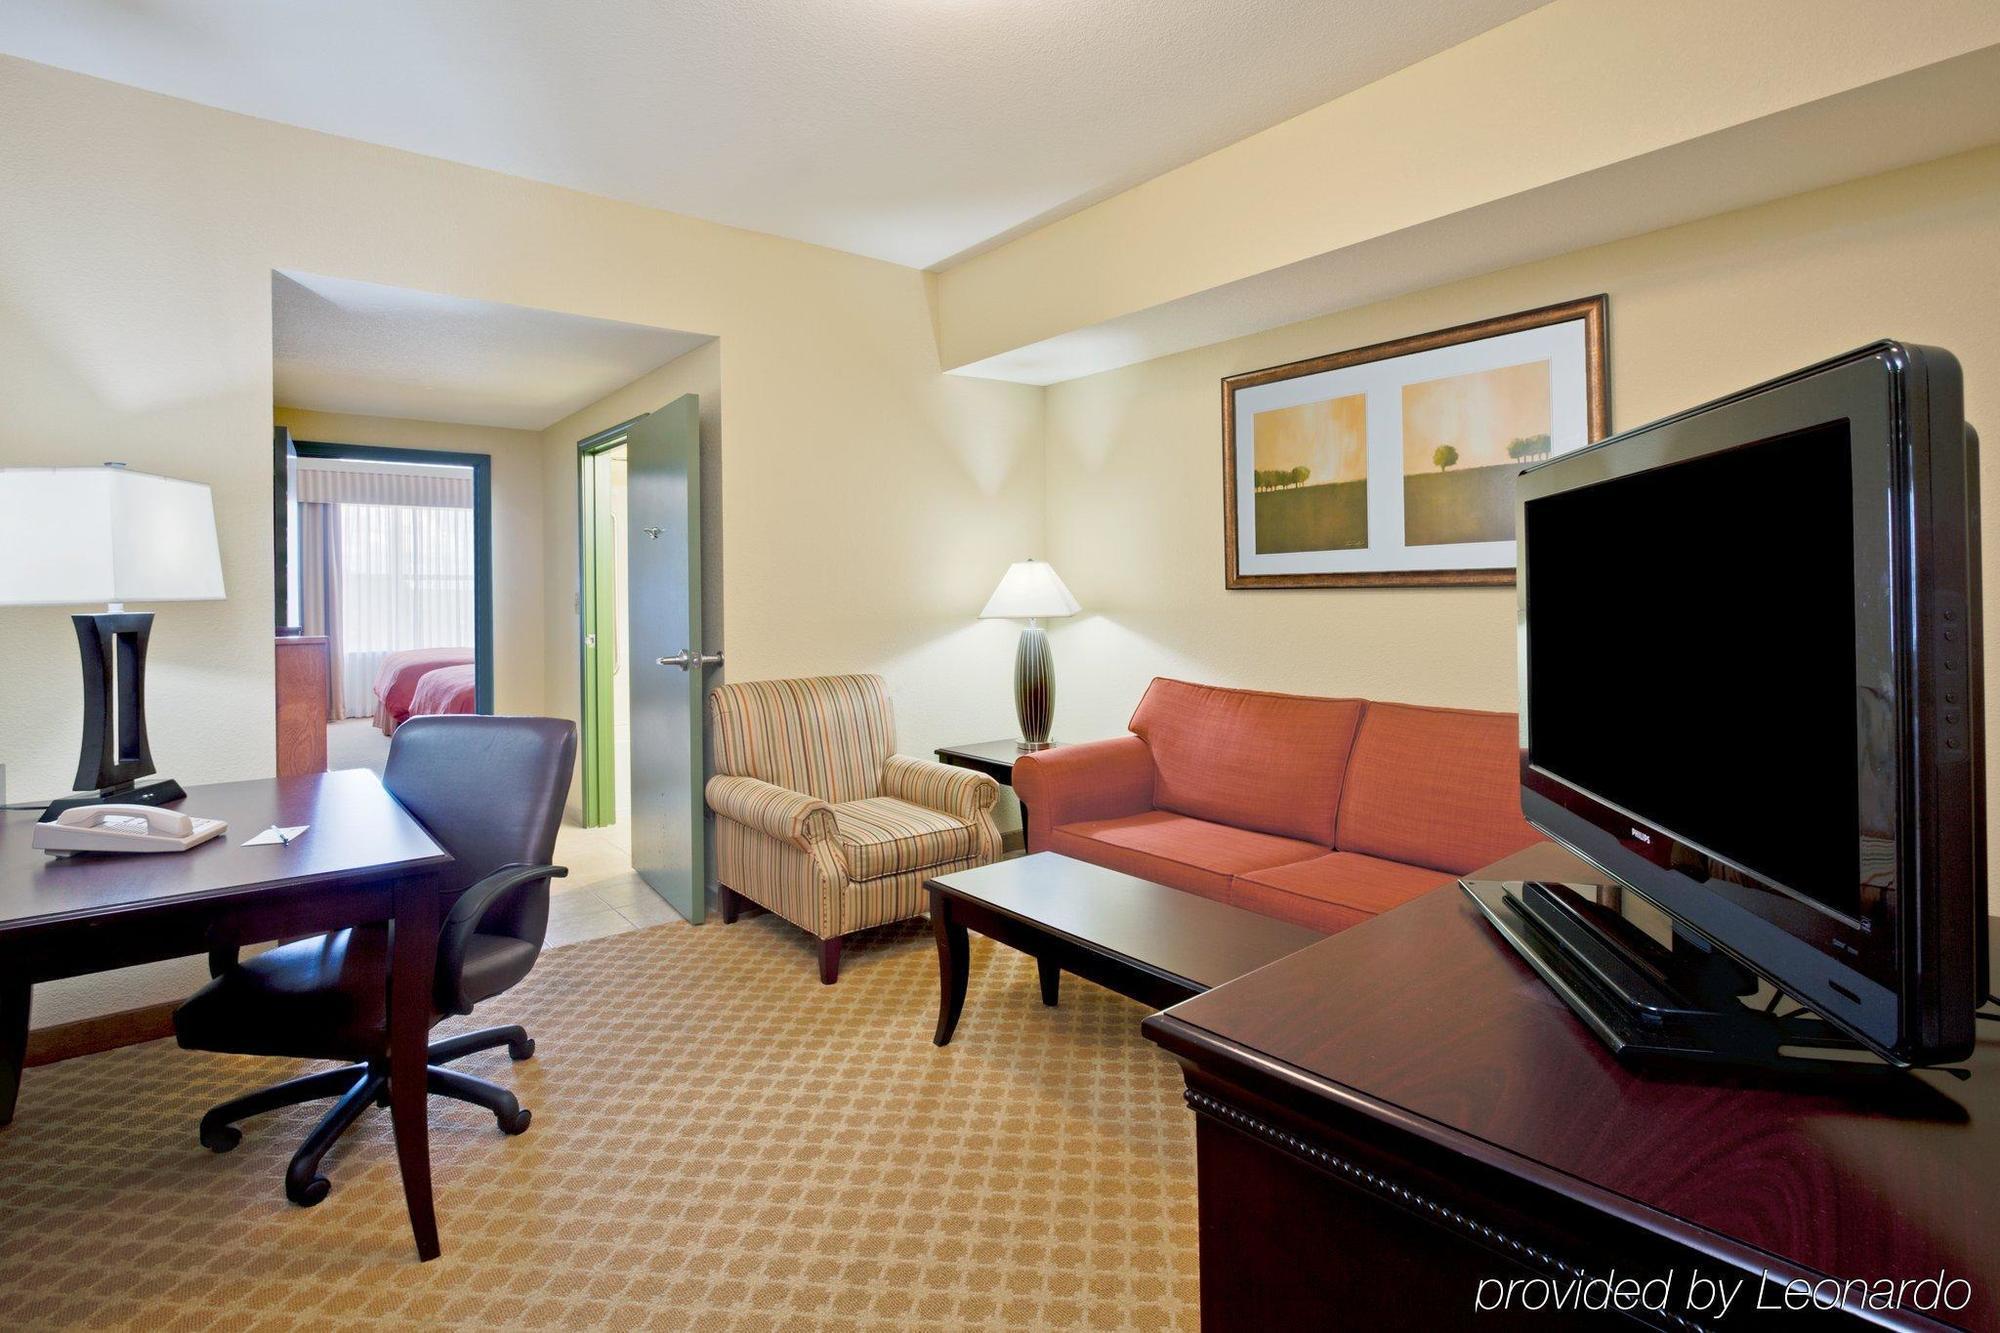 Country Inn & Suites By Radisson, Tallahassee-University Area, Fl Camera foto